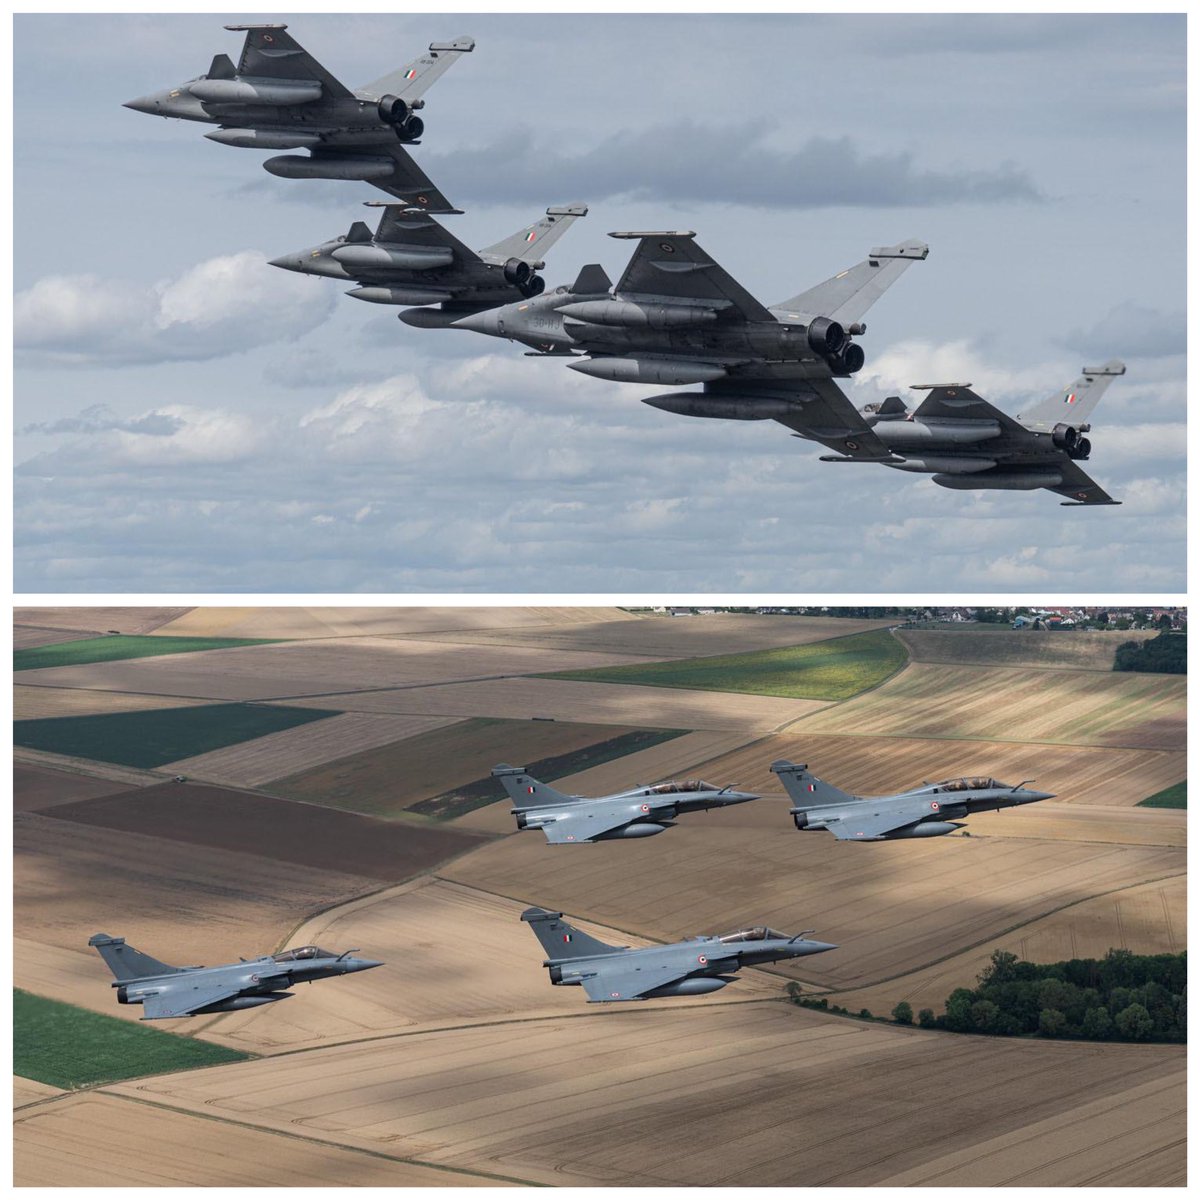 #IAF & French Air Force Rafales practise over the Parisian skies to achieve perfect synchronisation for the upcoming #BastilleDay Parade.

#14Juillet #France #fighterjet #IndianAirForce #25YearsOfStrategicPartnership
@Armee_de_lair